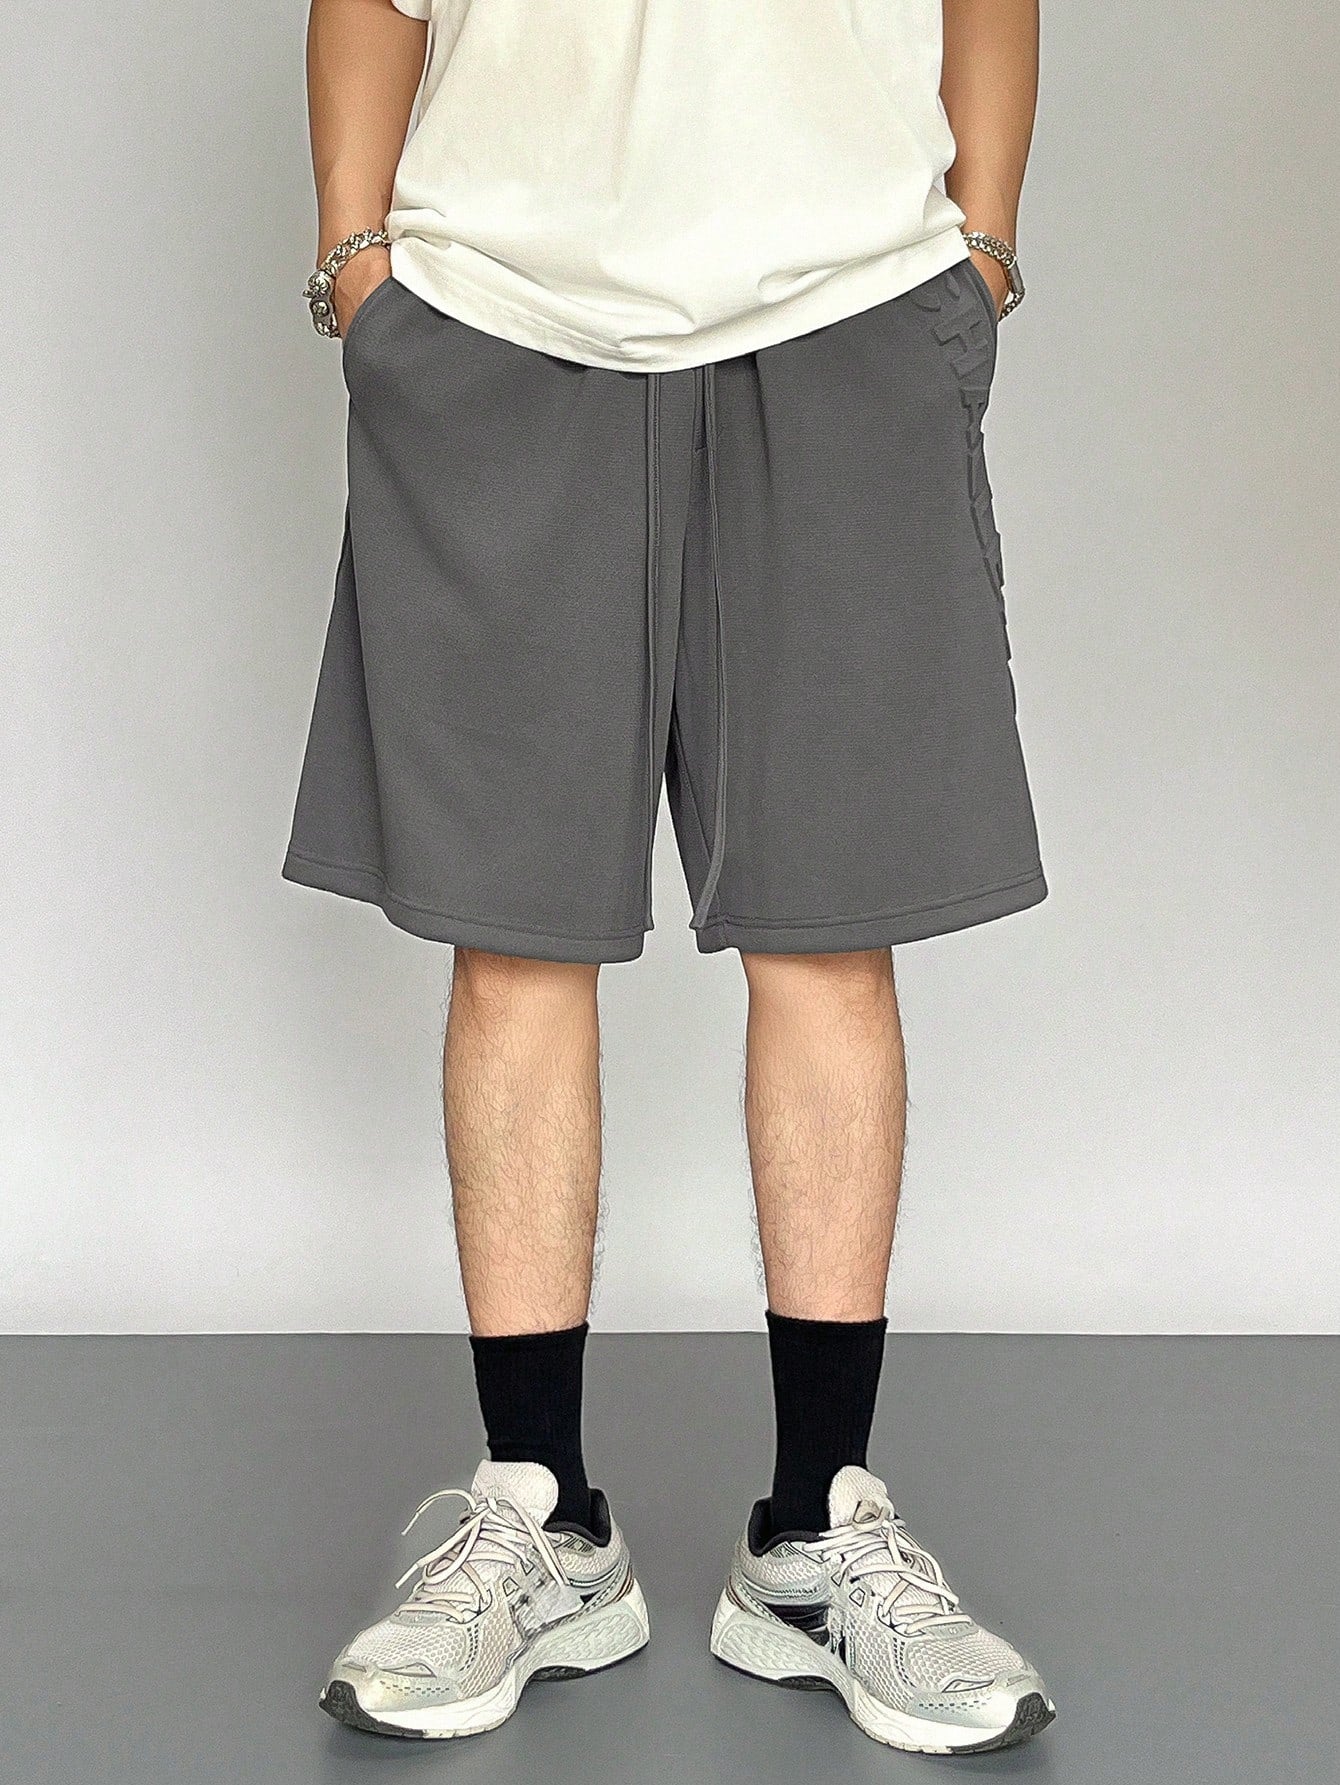 Men Summer Solid Color Drawstring Shorts With Letter Print